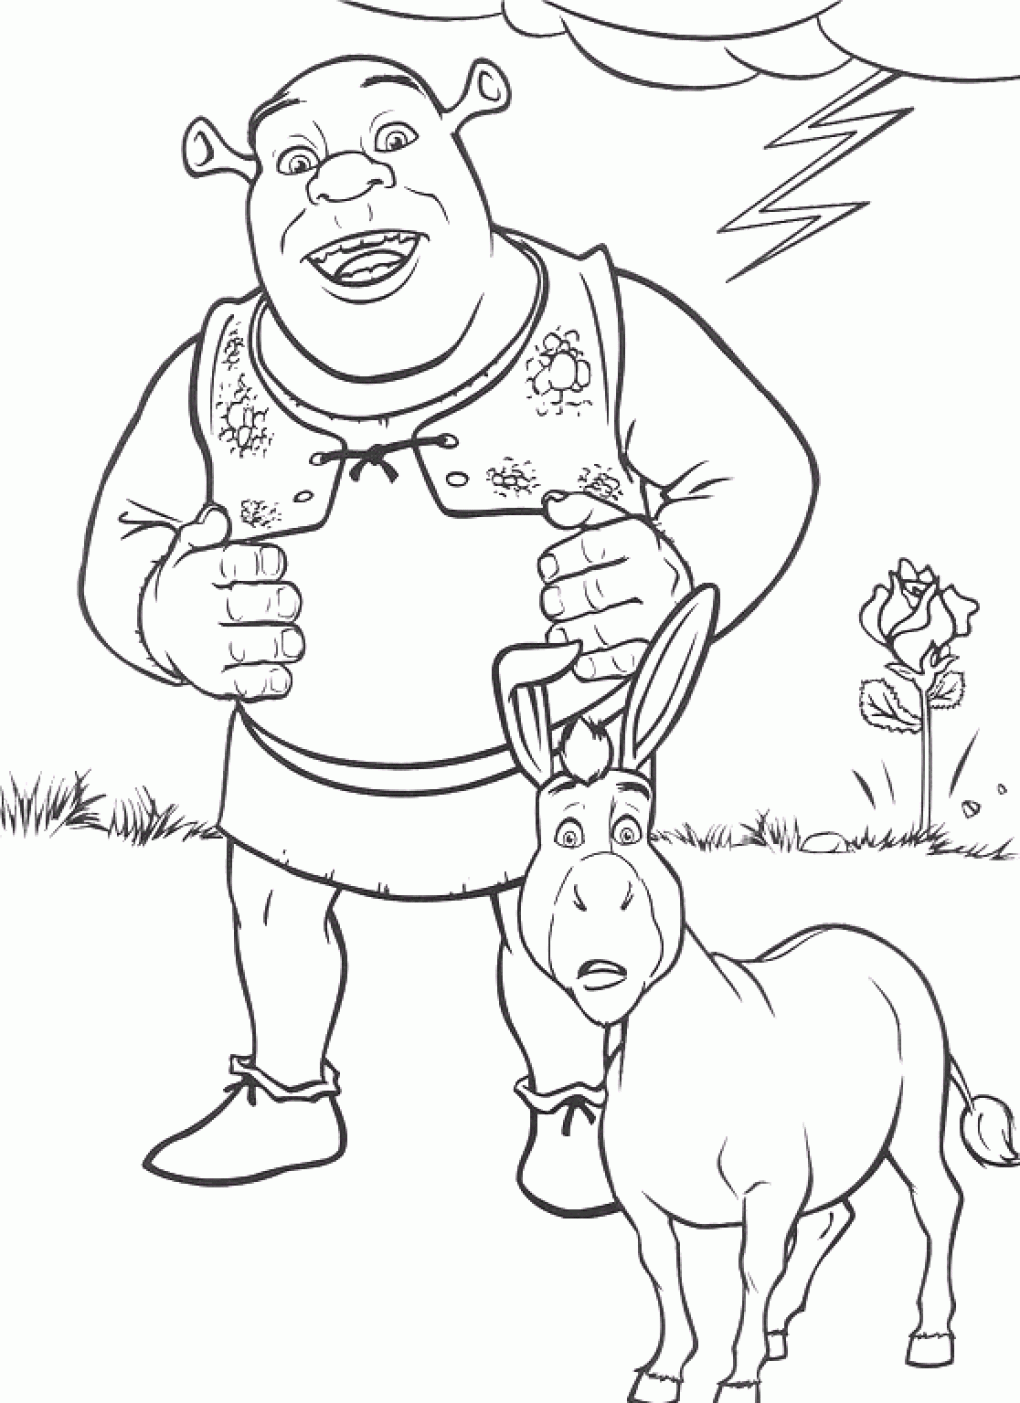 Free Printable Shrek Coloring Pages For Kids HD Wallpapers Download Free Images Wallpaper [wallpaper896.blogspot.com]